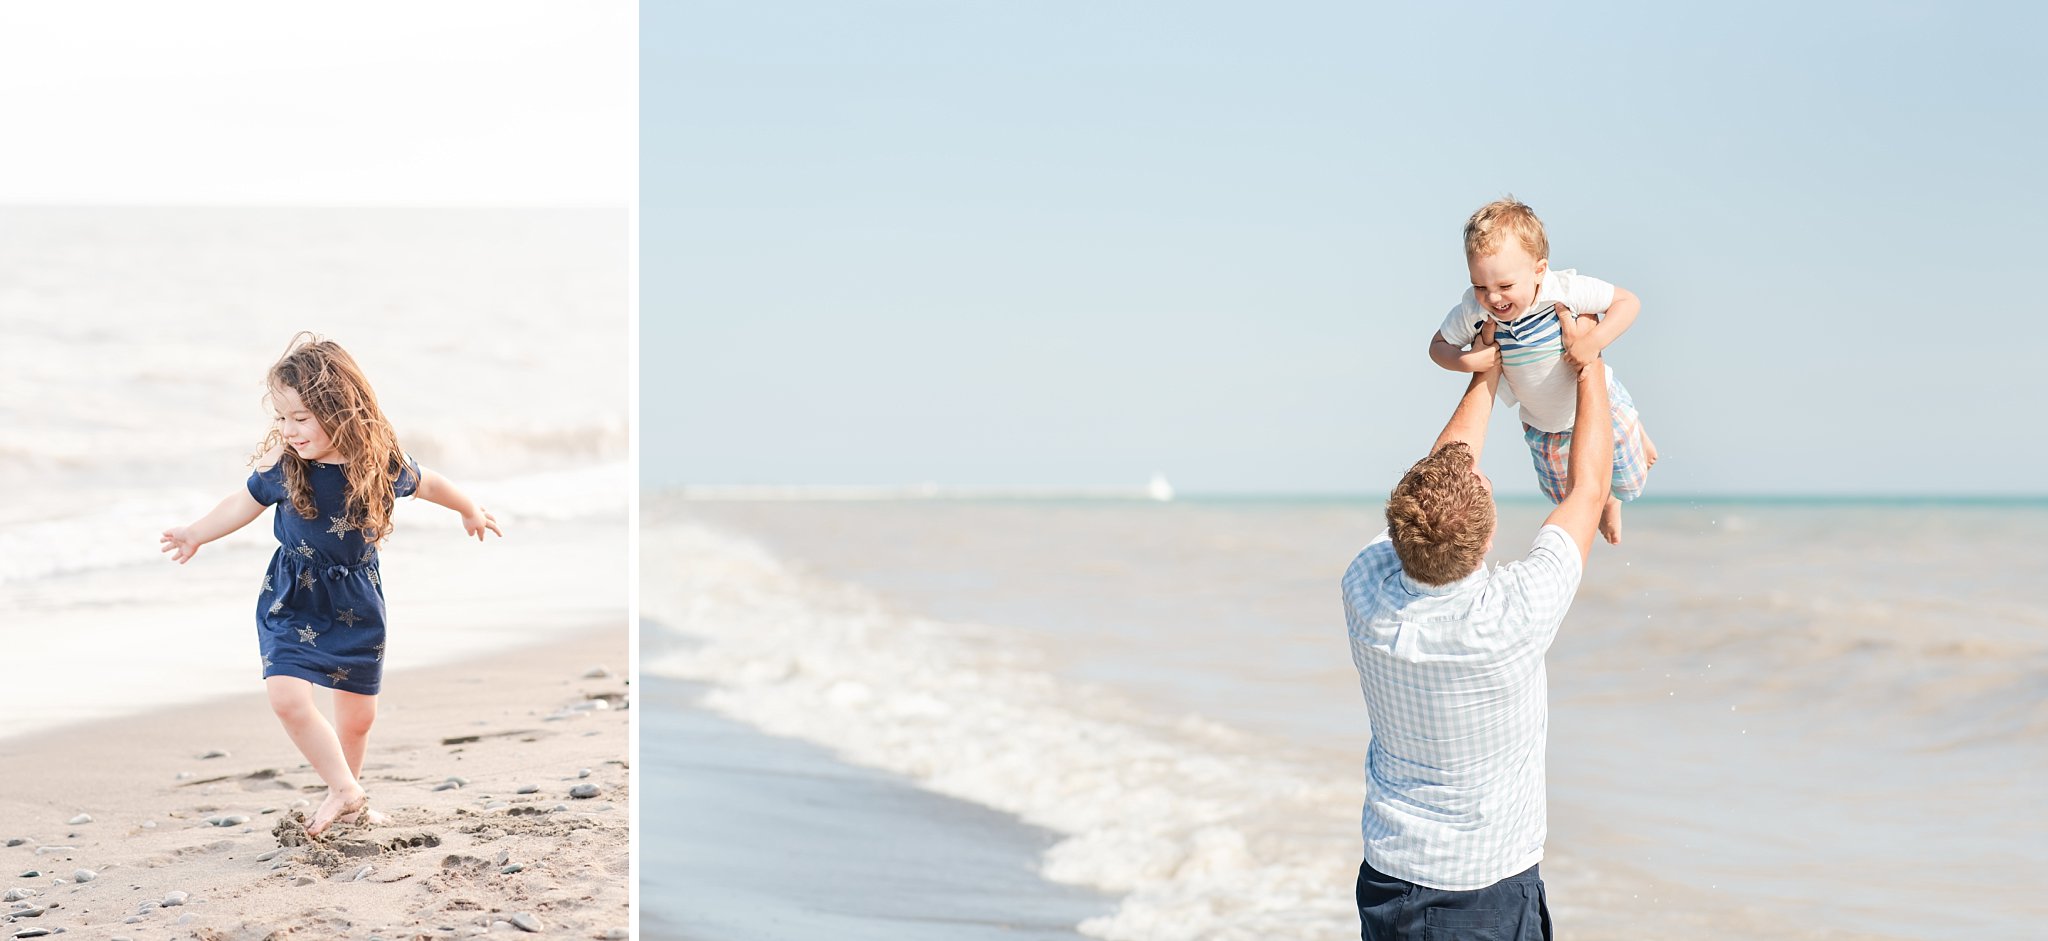 two photos. one - a little girl with long brown hair and a blue dress twirls in the sand with water in the background. two - a dad in a light blue shirt and dark blue shorts, lifts his son in the air. it's a sunny day, there are blue skies and waves in the background. family photography london ontario.